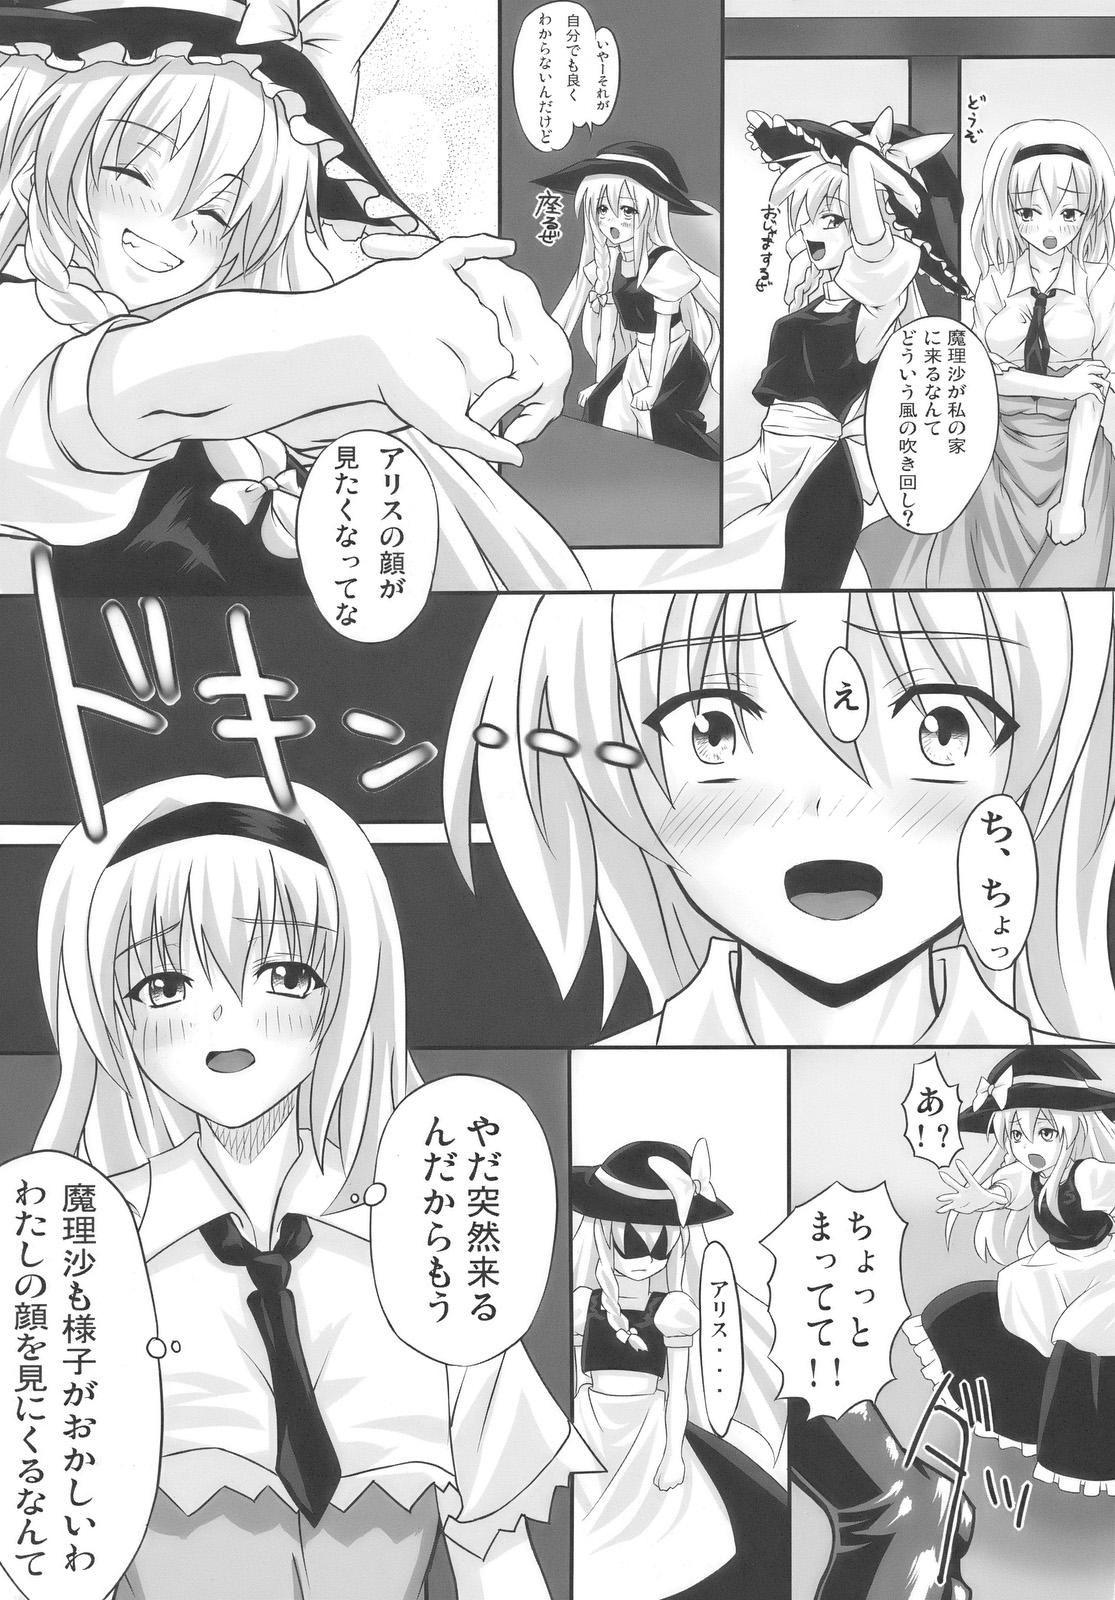 Blackdick 東方相聞歌 - Touhou project Long Hair - Page 5